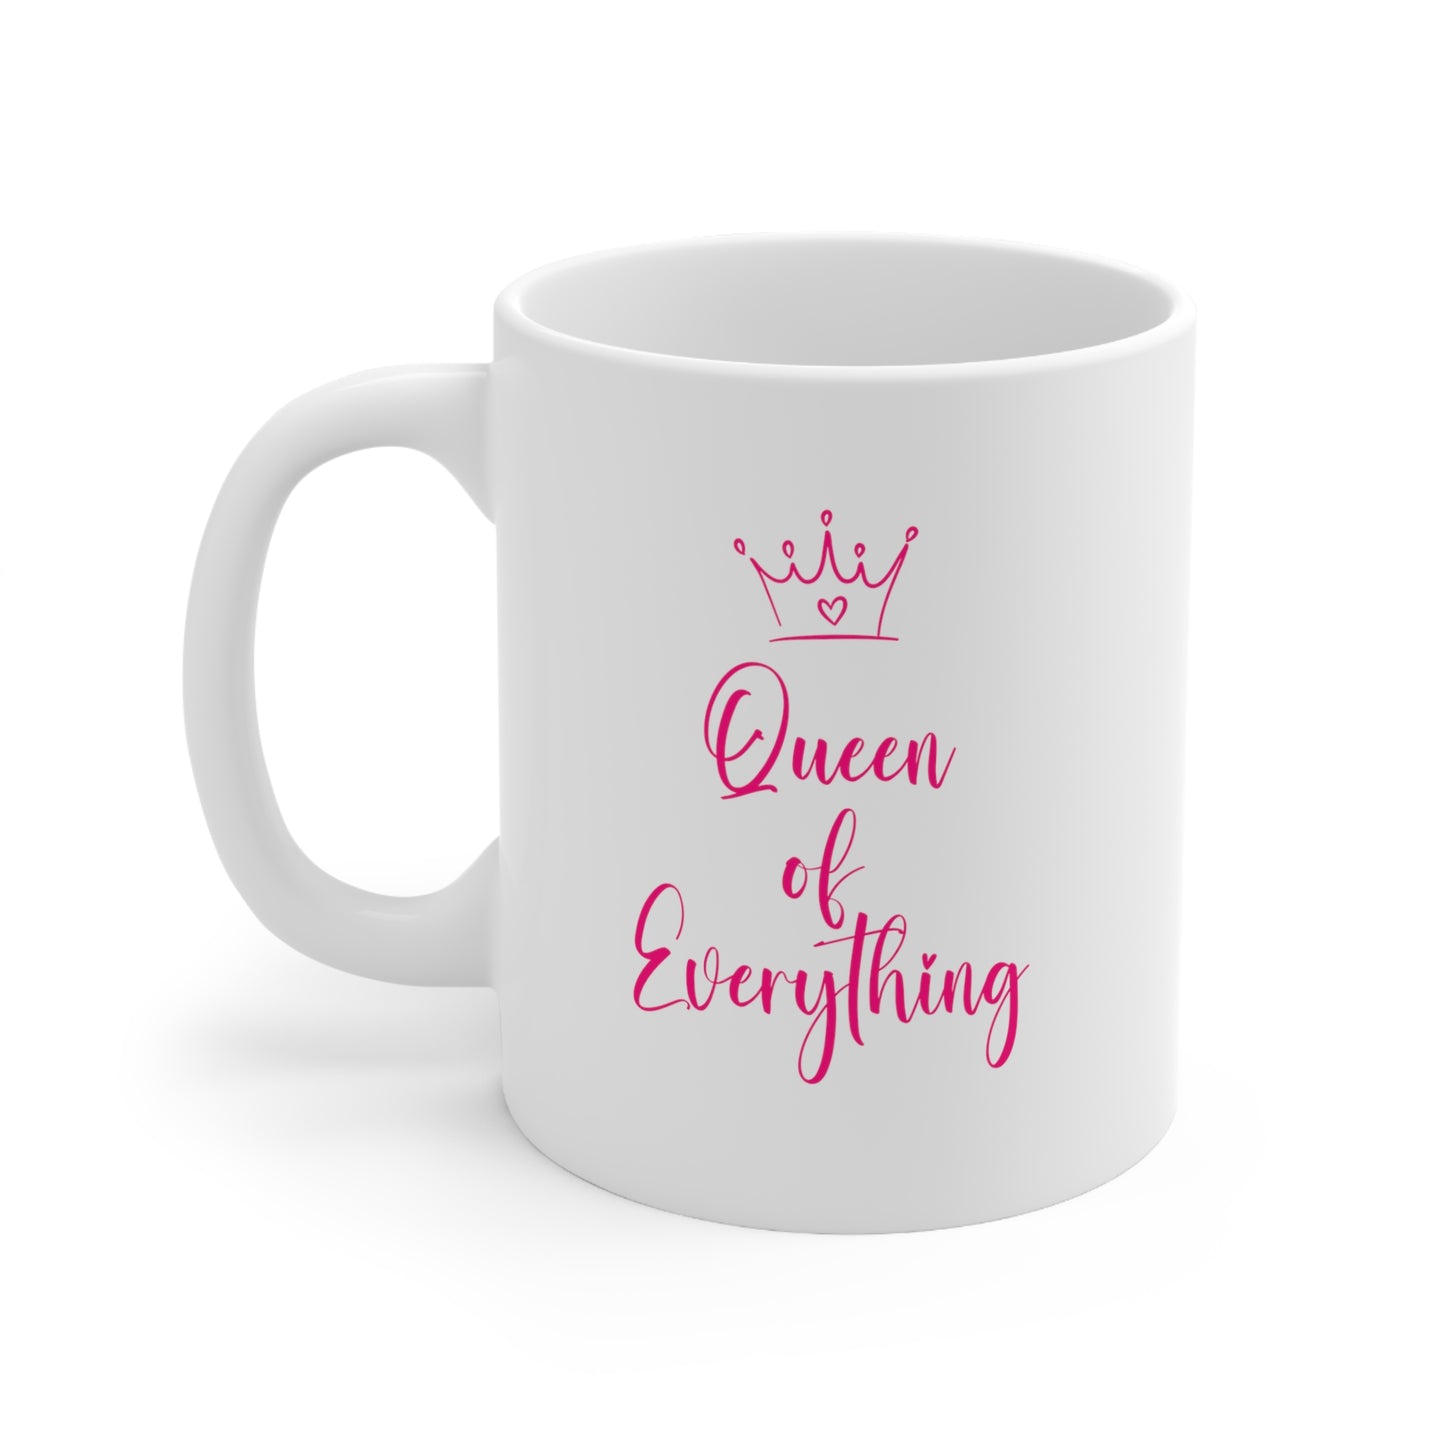 Queen of Everything Mug - Yes I am